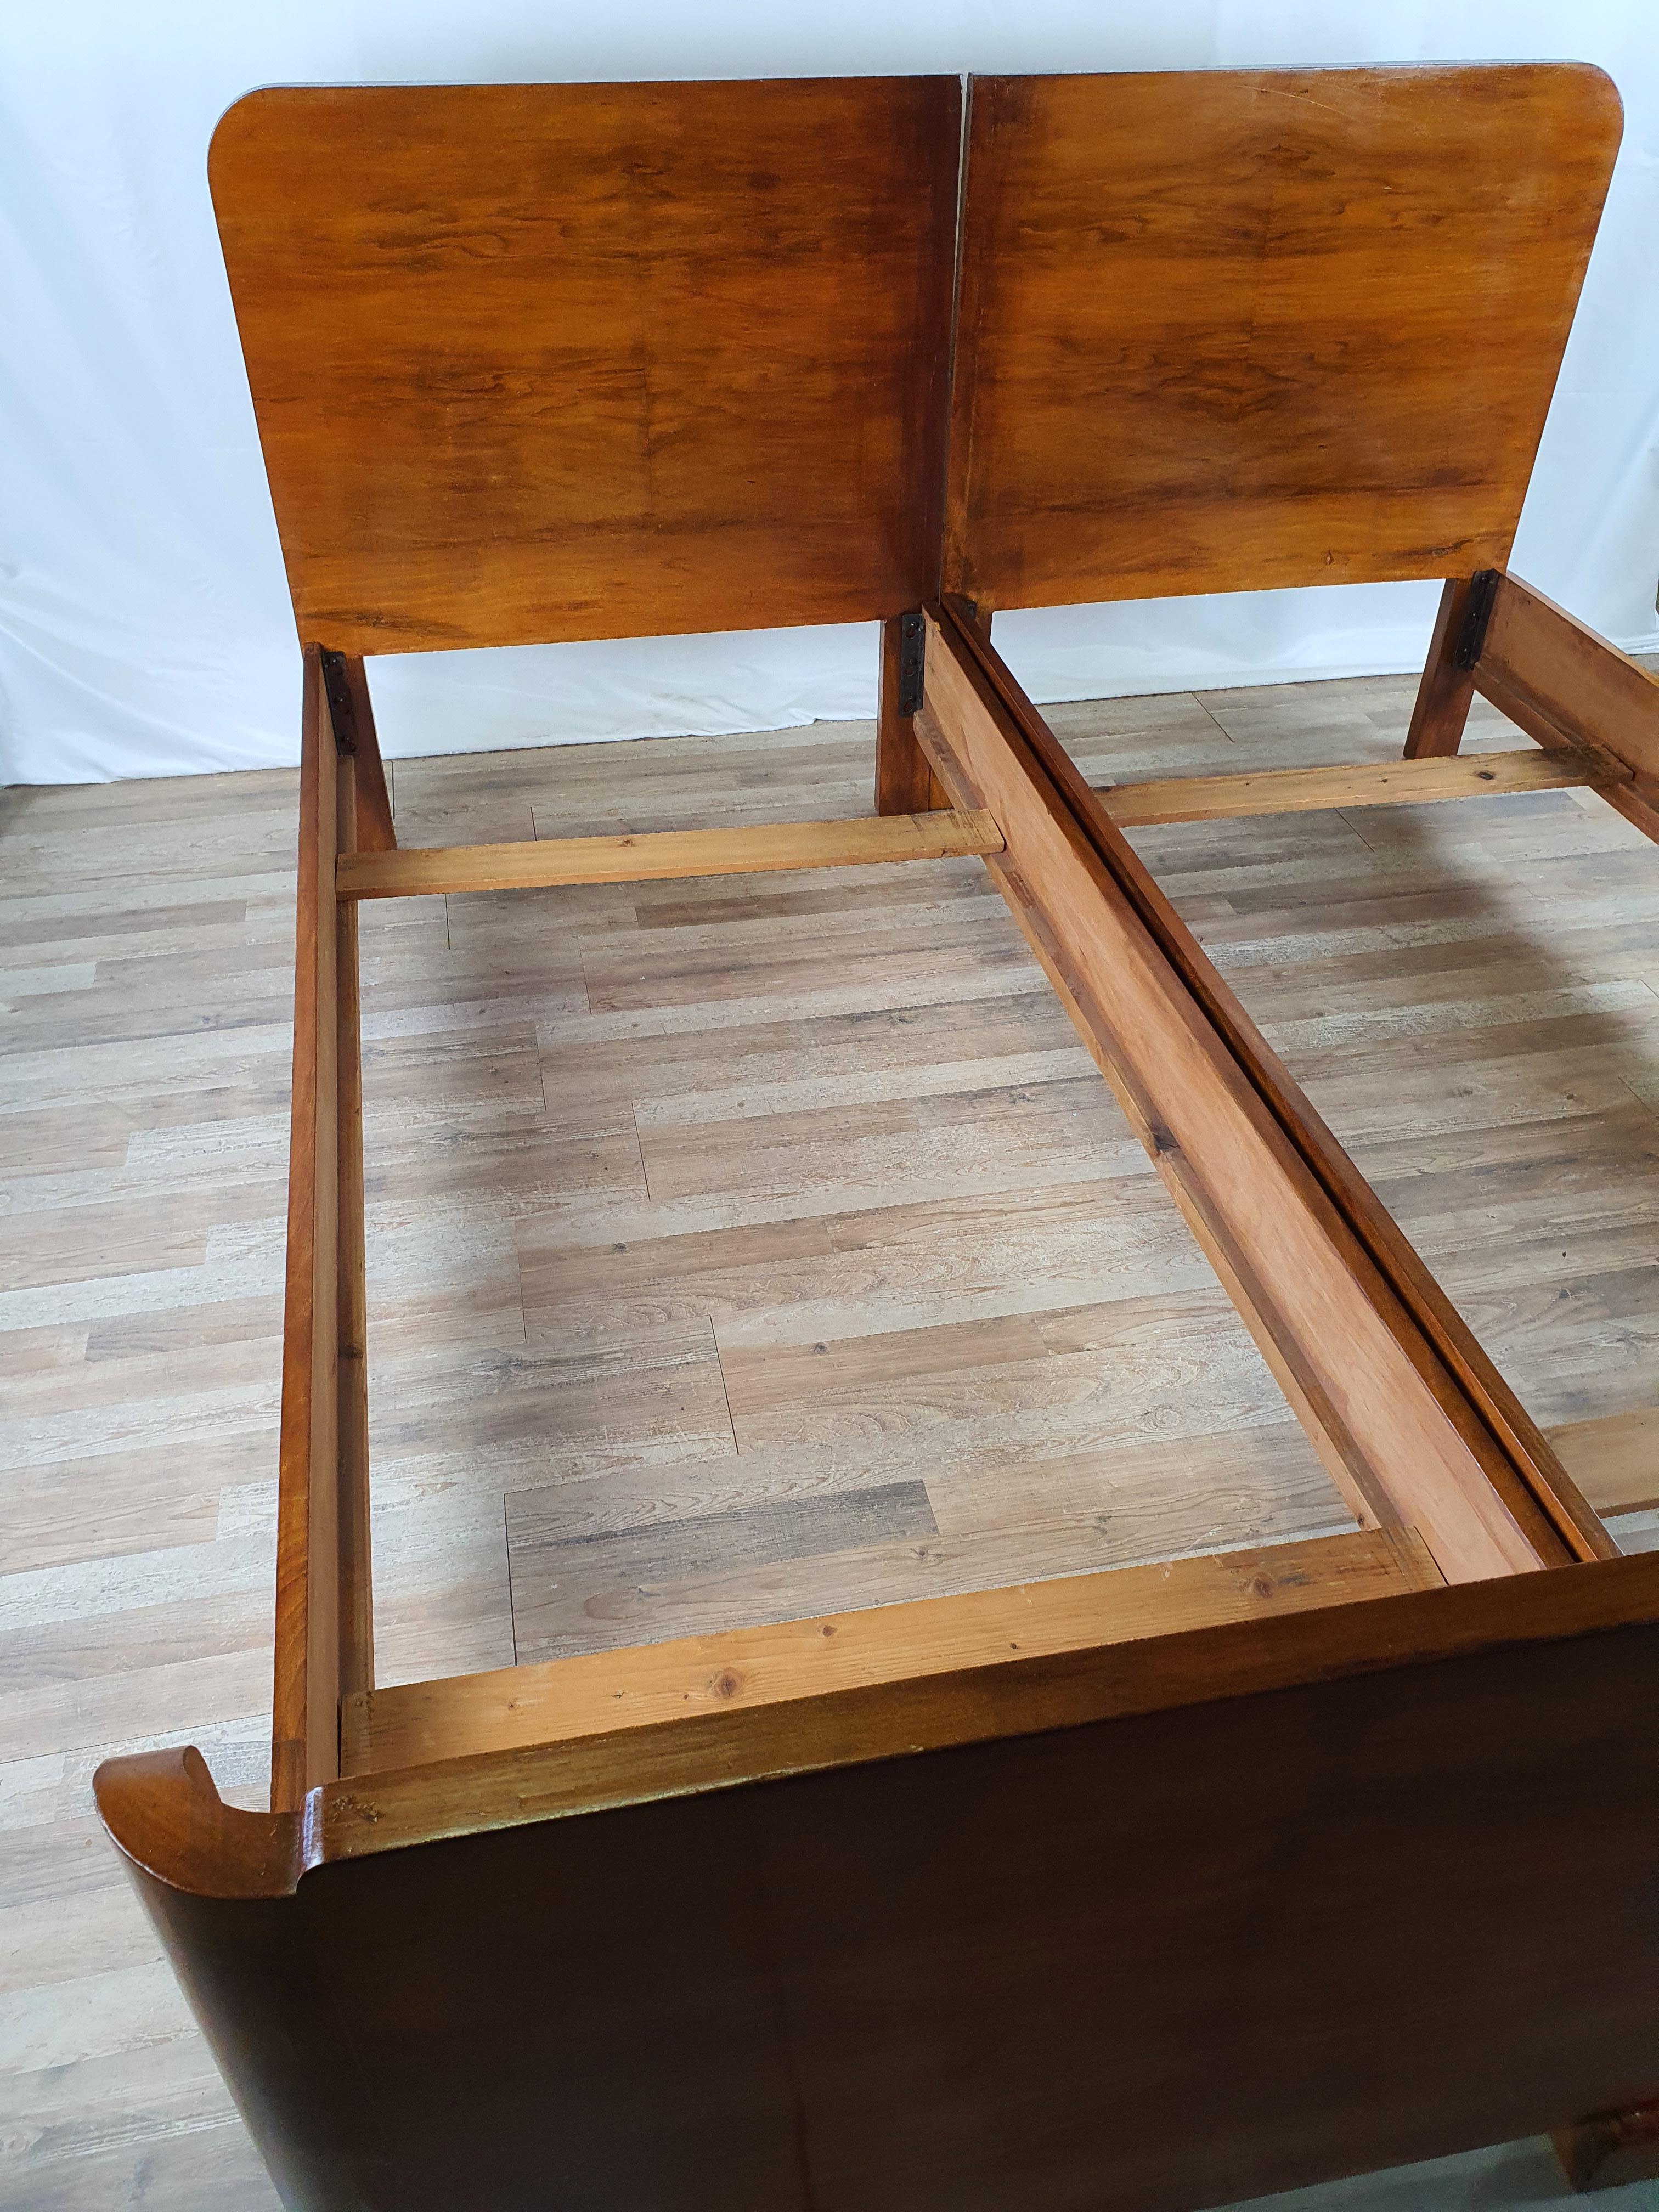 Double bed in walnut from the 1940s, Italian production in Art Decò style.

At will it can be used as two single beds as the sections are only pushed together.

Measures : L 180cm
D 200cm
H headboard 100.5cm
H footboard 69.5cm
Internal space